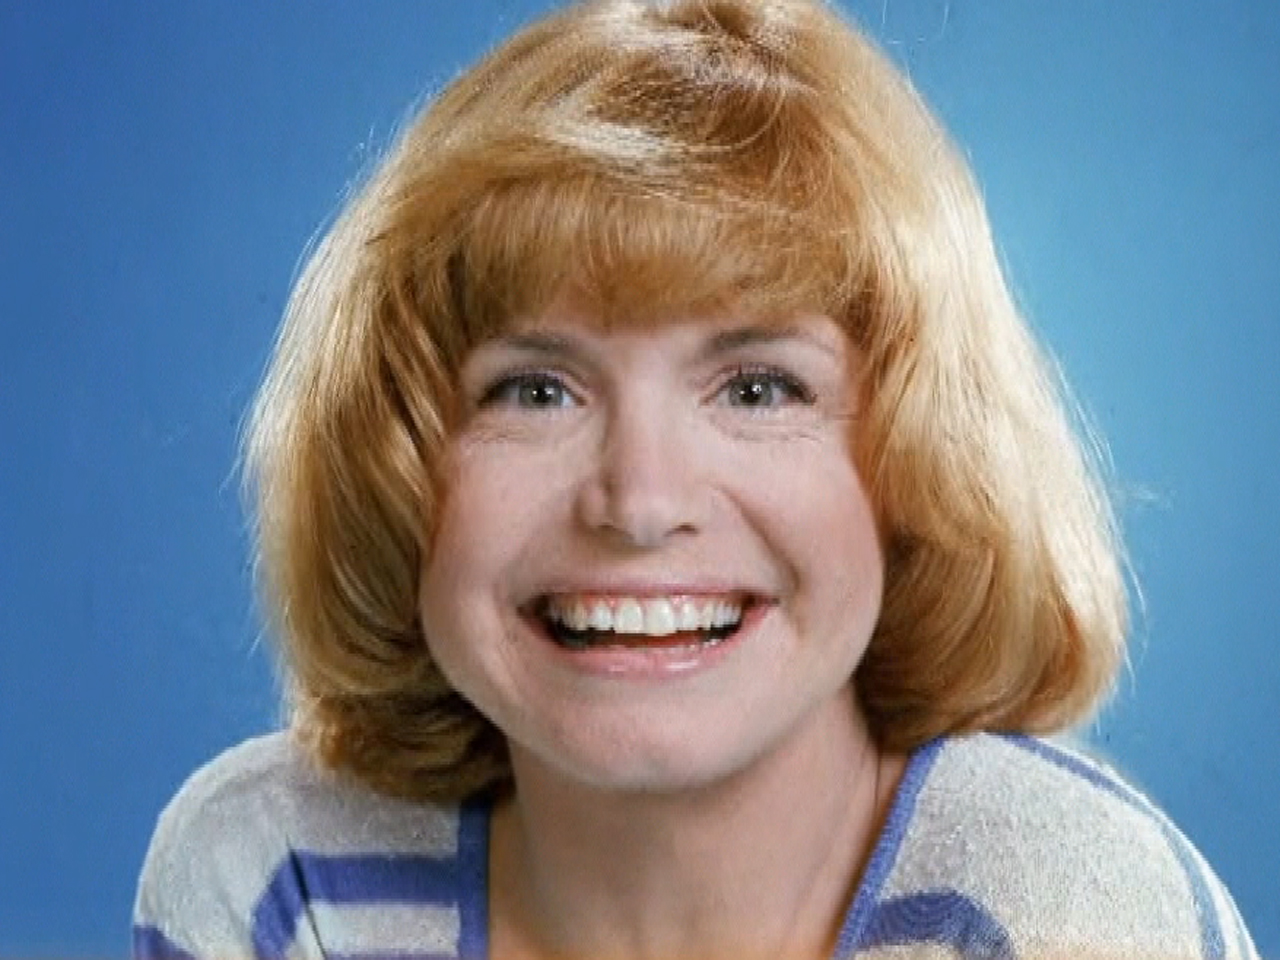 Bonnie Franklin, one of the great TV moms, personified the struggling singl...